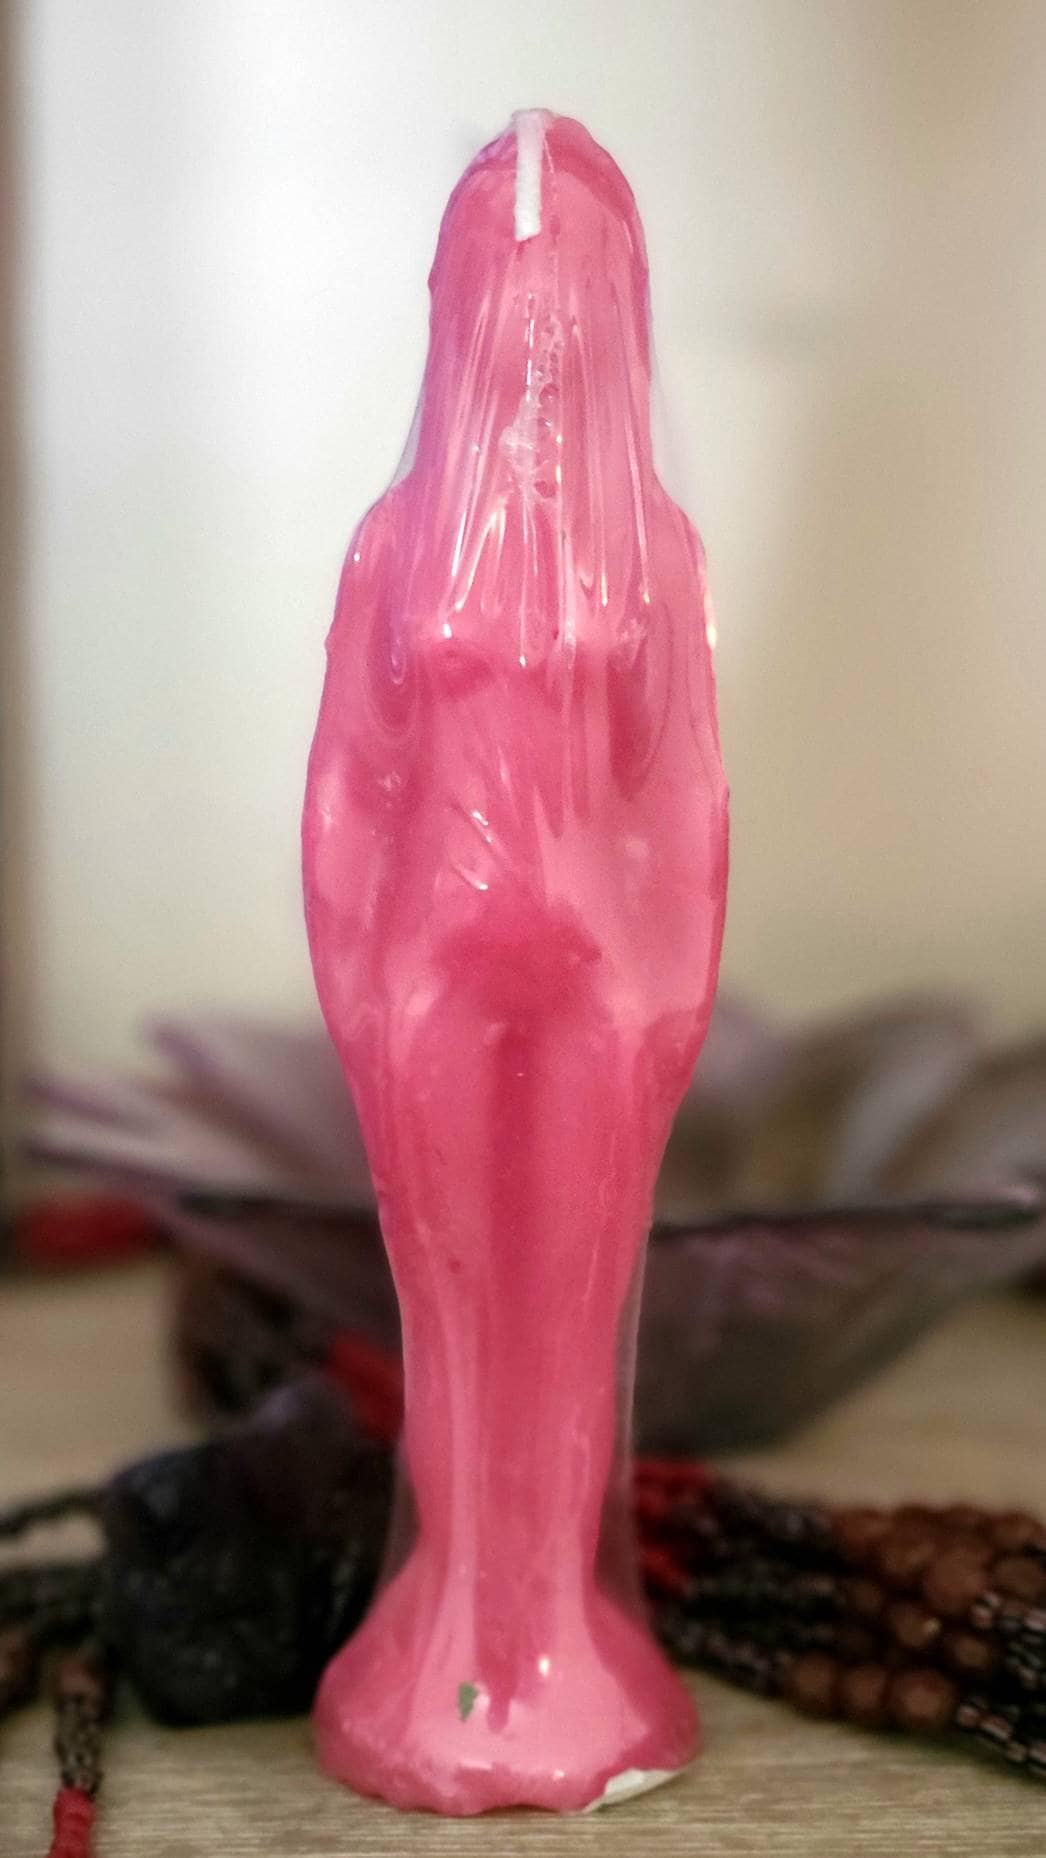 Pink Female Figure candle for self love, friendship, light romance